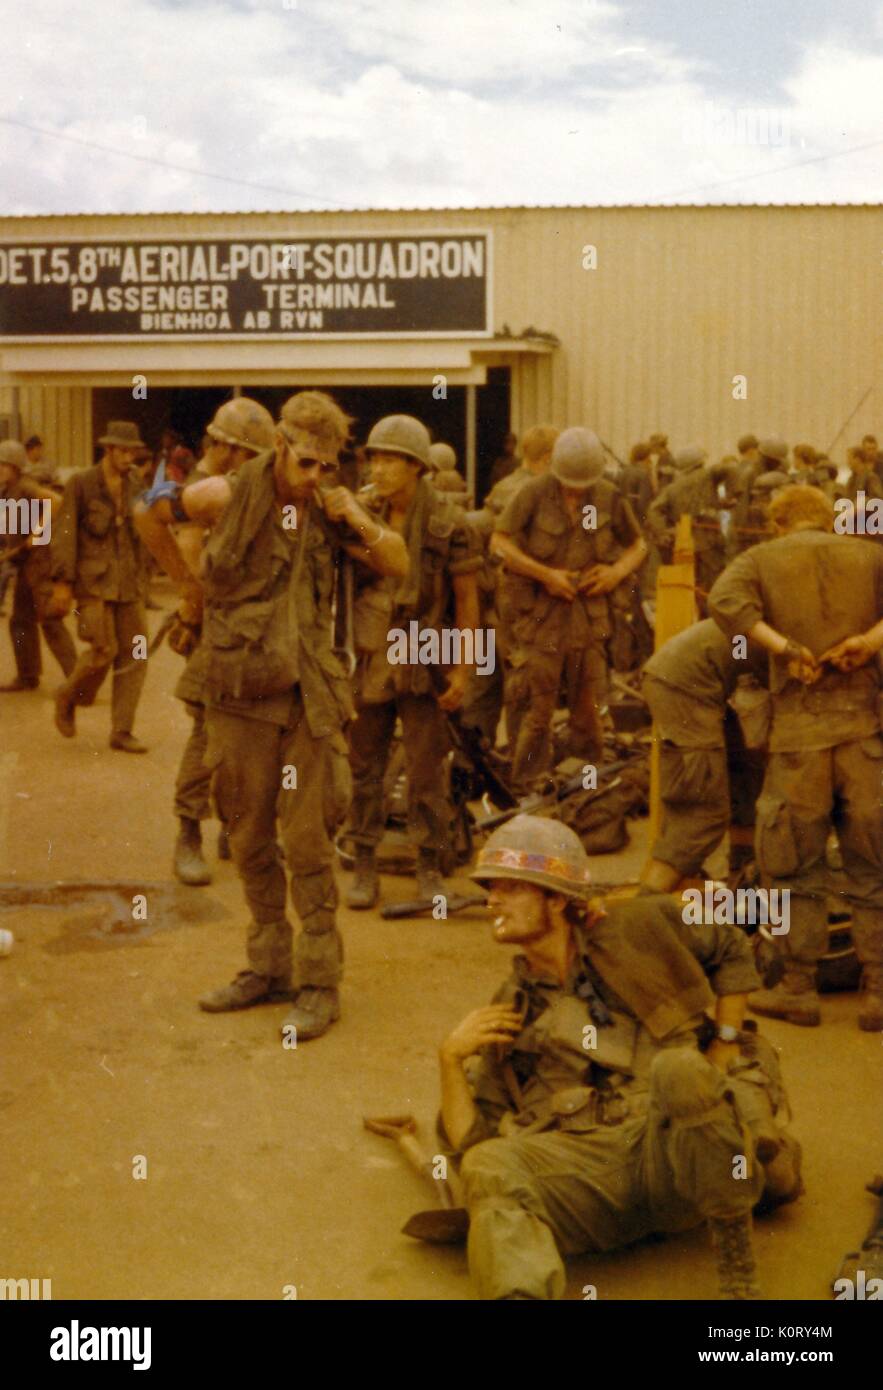 A large group of soldiers can be seen in their uniforms with full combat gear, doing their best to relax by socializing and smoking, awaiting transport, Bien Hoa Air Base, Vietnam, 1964. Stock Photo